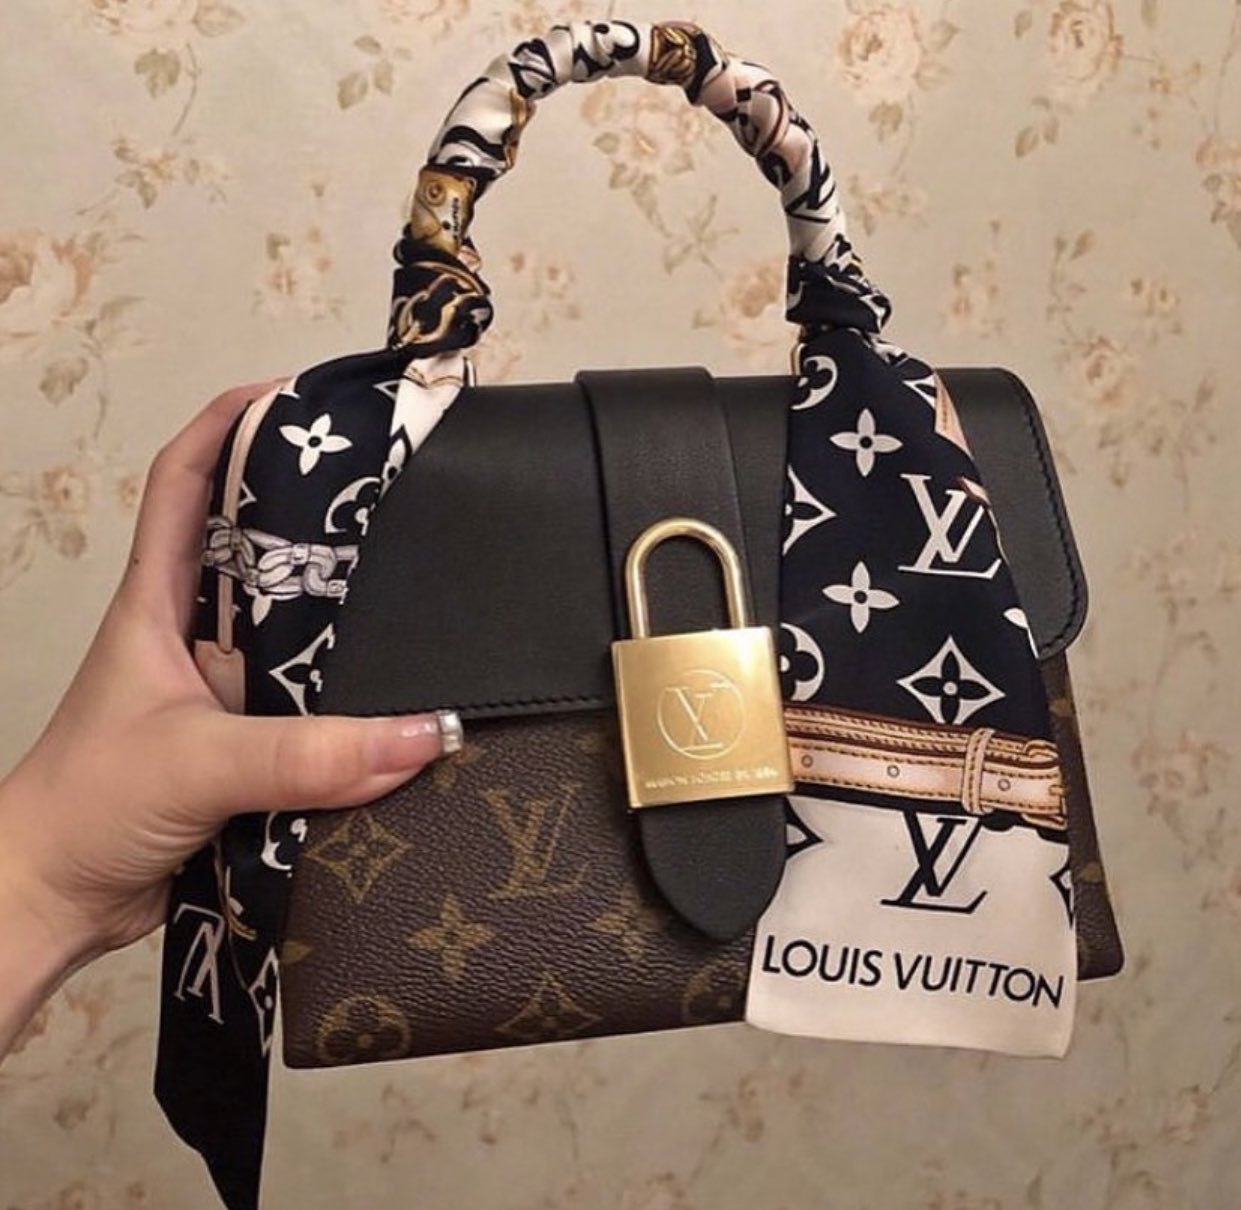 m ✨ on X: thinking of this louis vuitton bag  / X